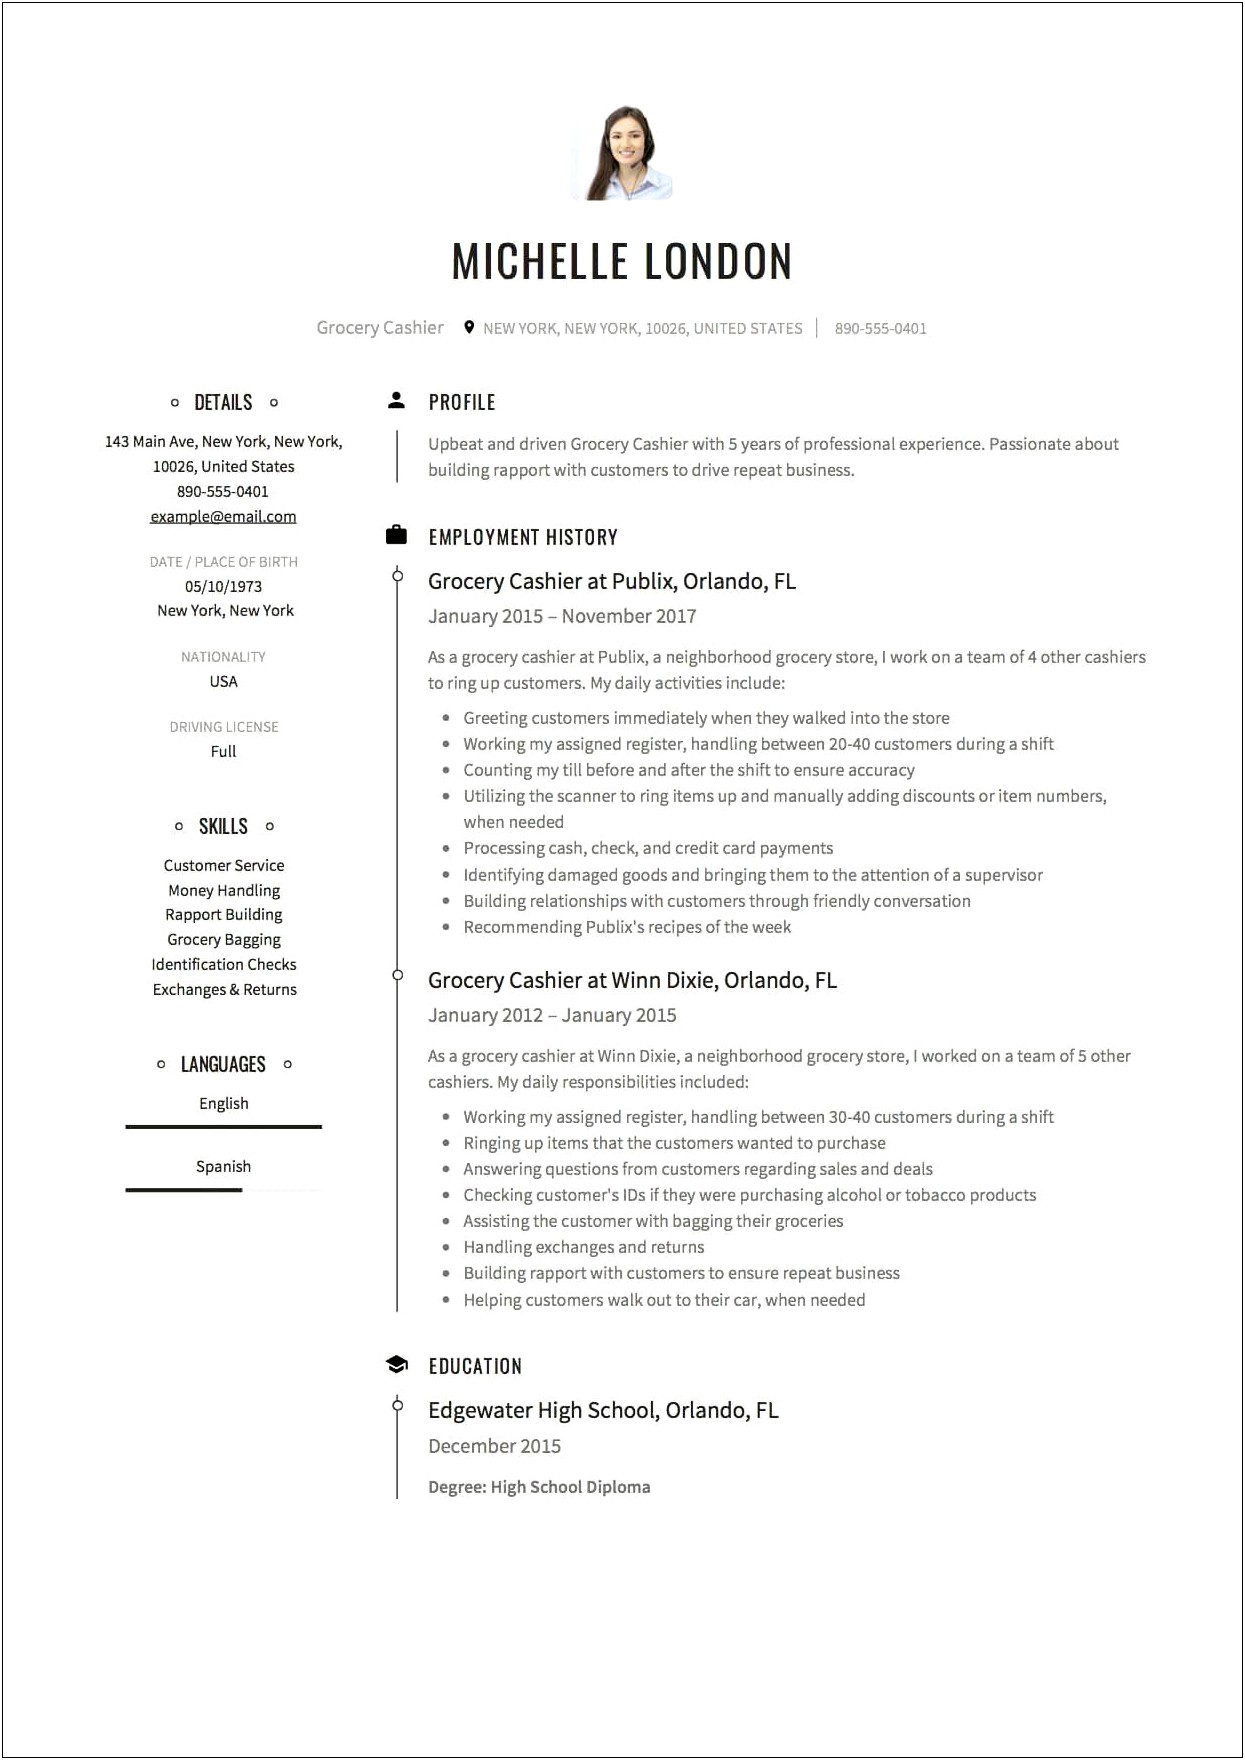 General Resume Objective Examples For Cashier